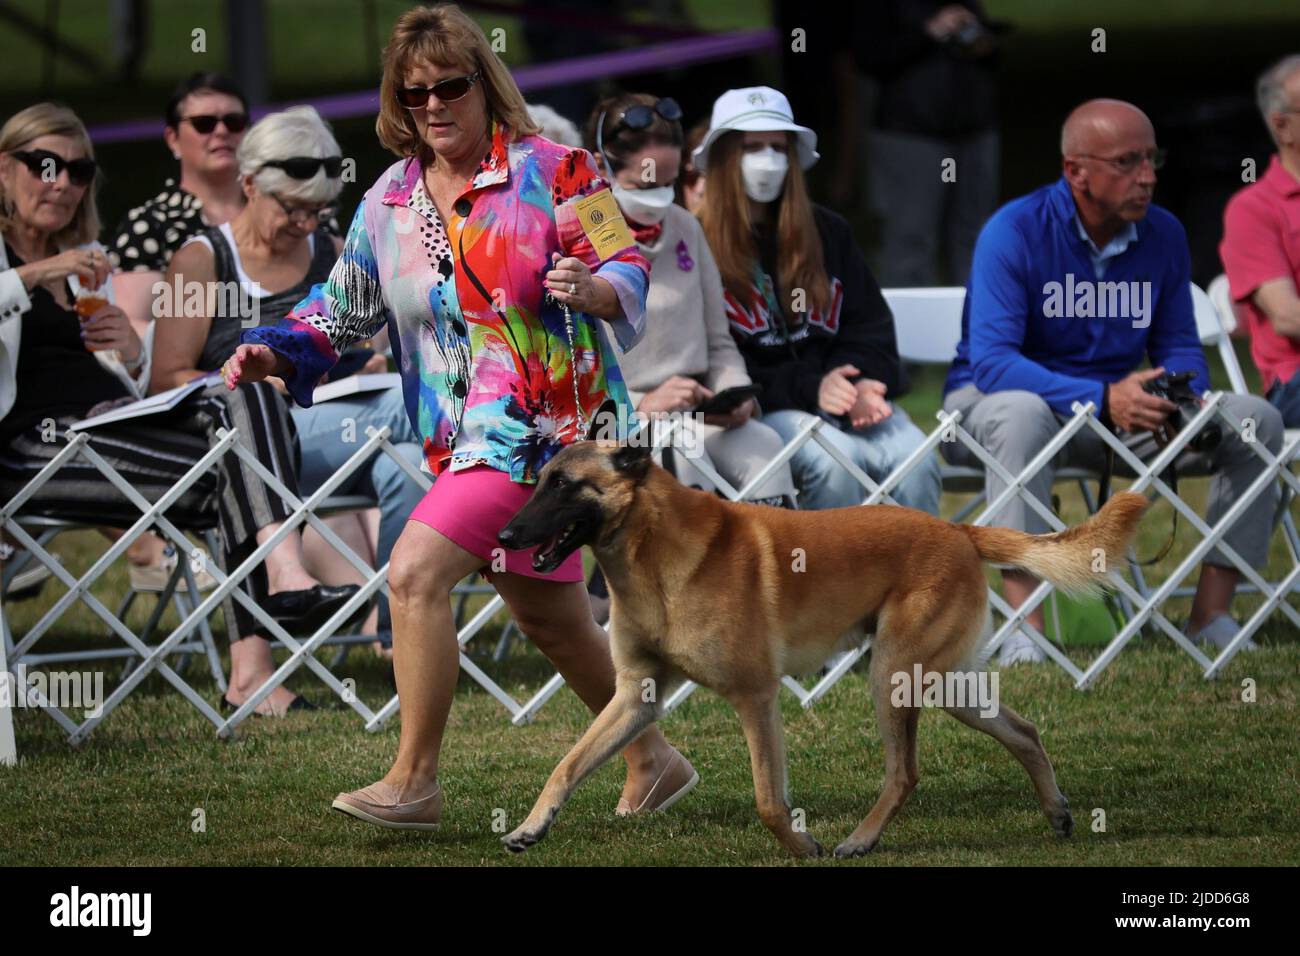 A handler runs a Belgian Malinois dog during the breed judging at the 146th Westminster Kennel Club Dog Show at the Lyndhurst Estate in Tarrytown, New York, U.S., June 20, 2022. REUTERS/Mike Segar Stock Photo